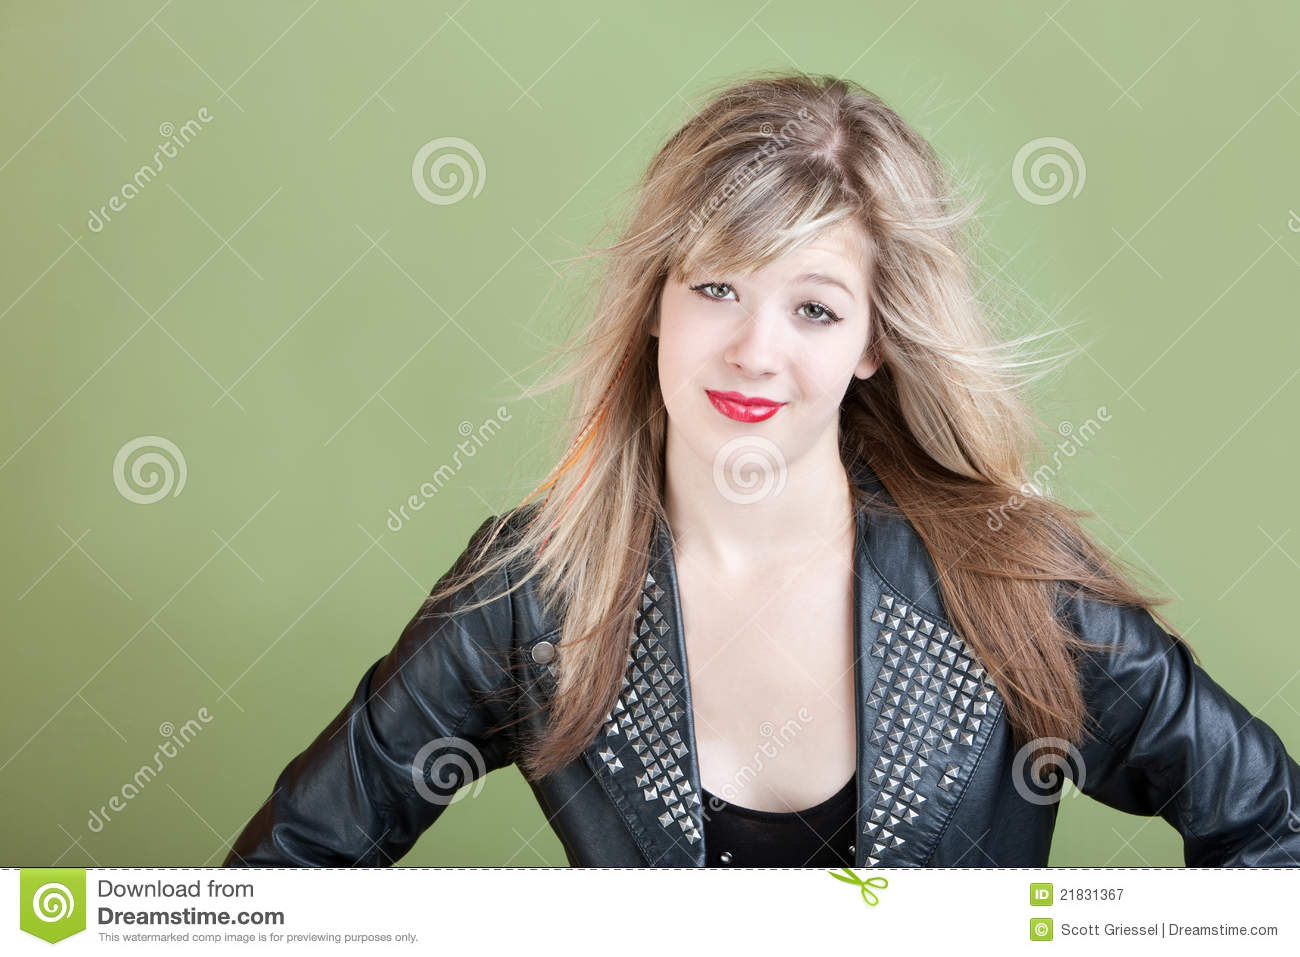 Messy Hair Royalty Free Stock Photography   Image  21831367